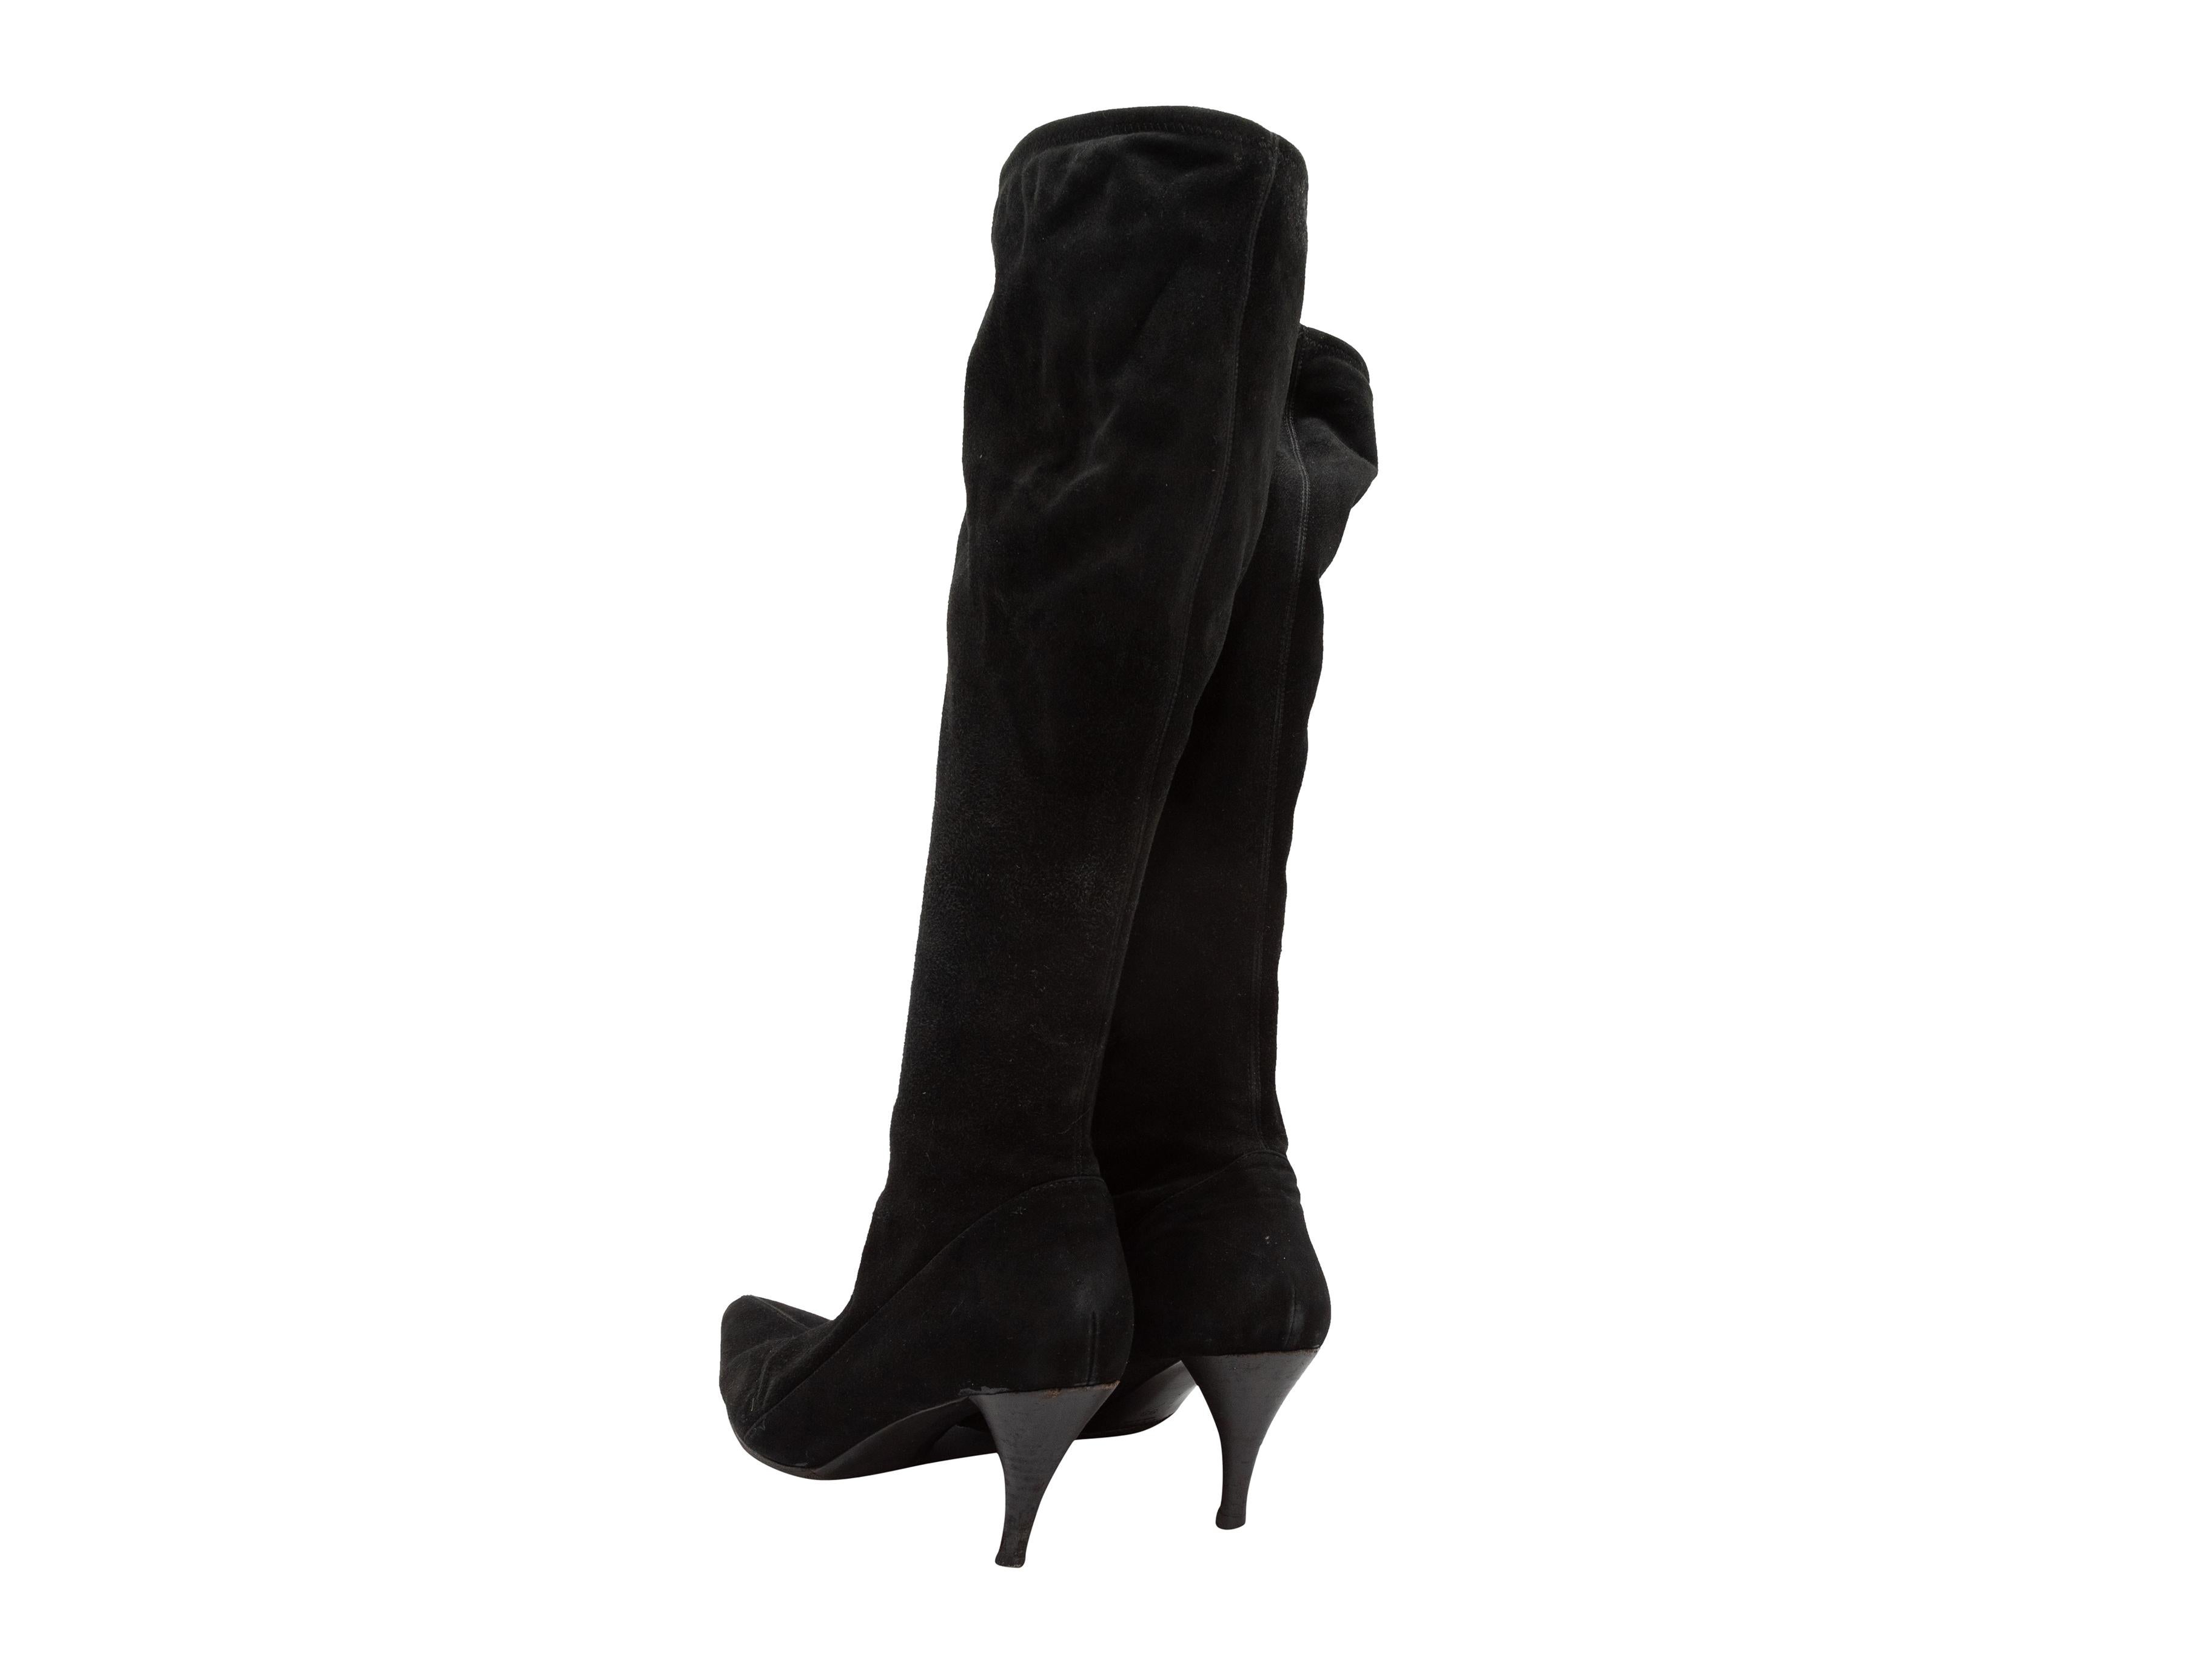 Black suede knee-high pointed-toe boots by Gucci. Pull-on style. 19